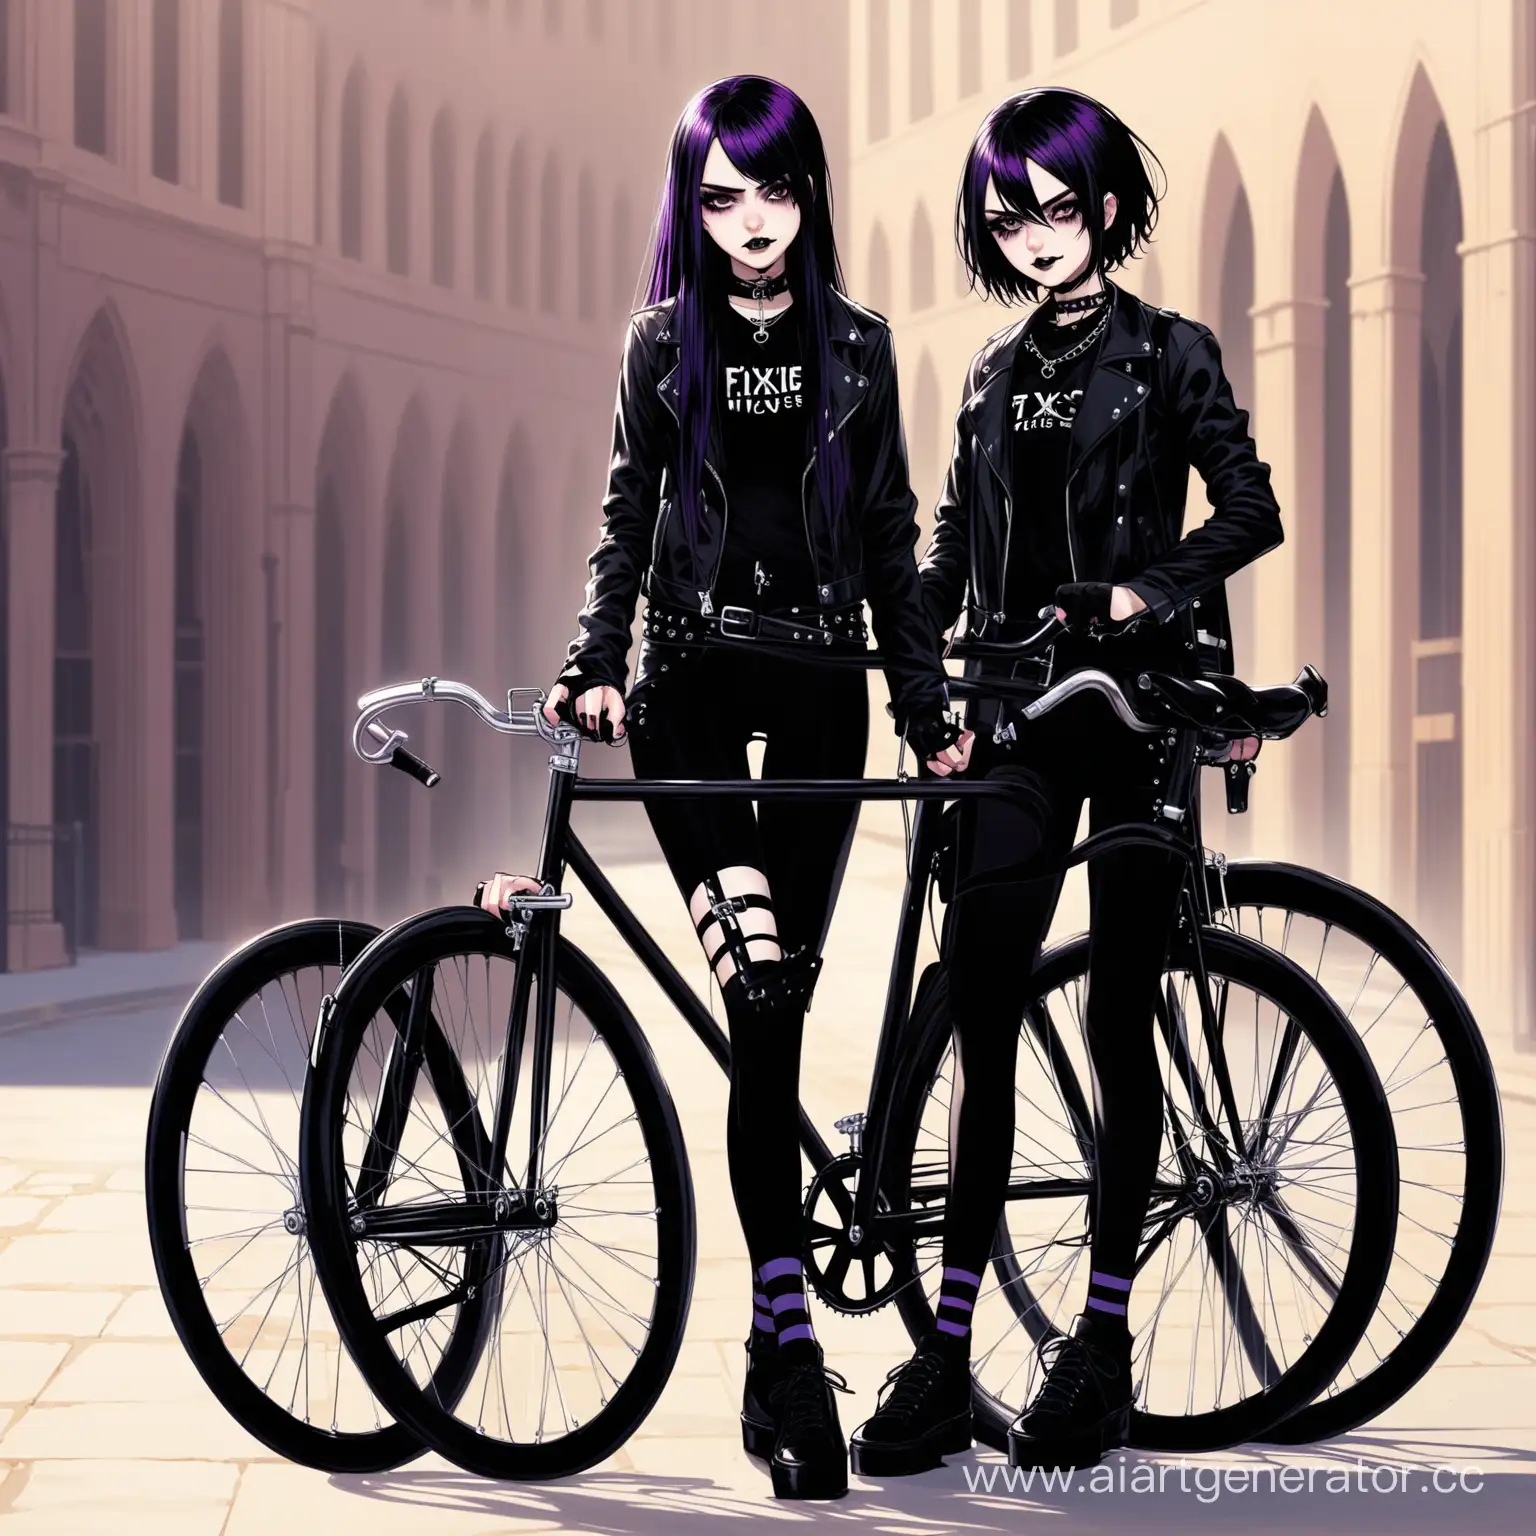 Fixies-Goths-Riding-in-Urban-Alleys